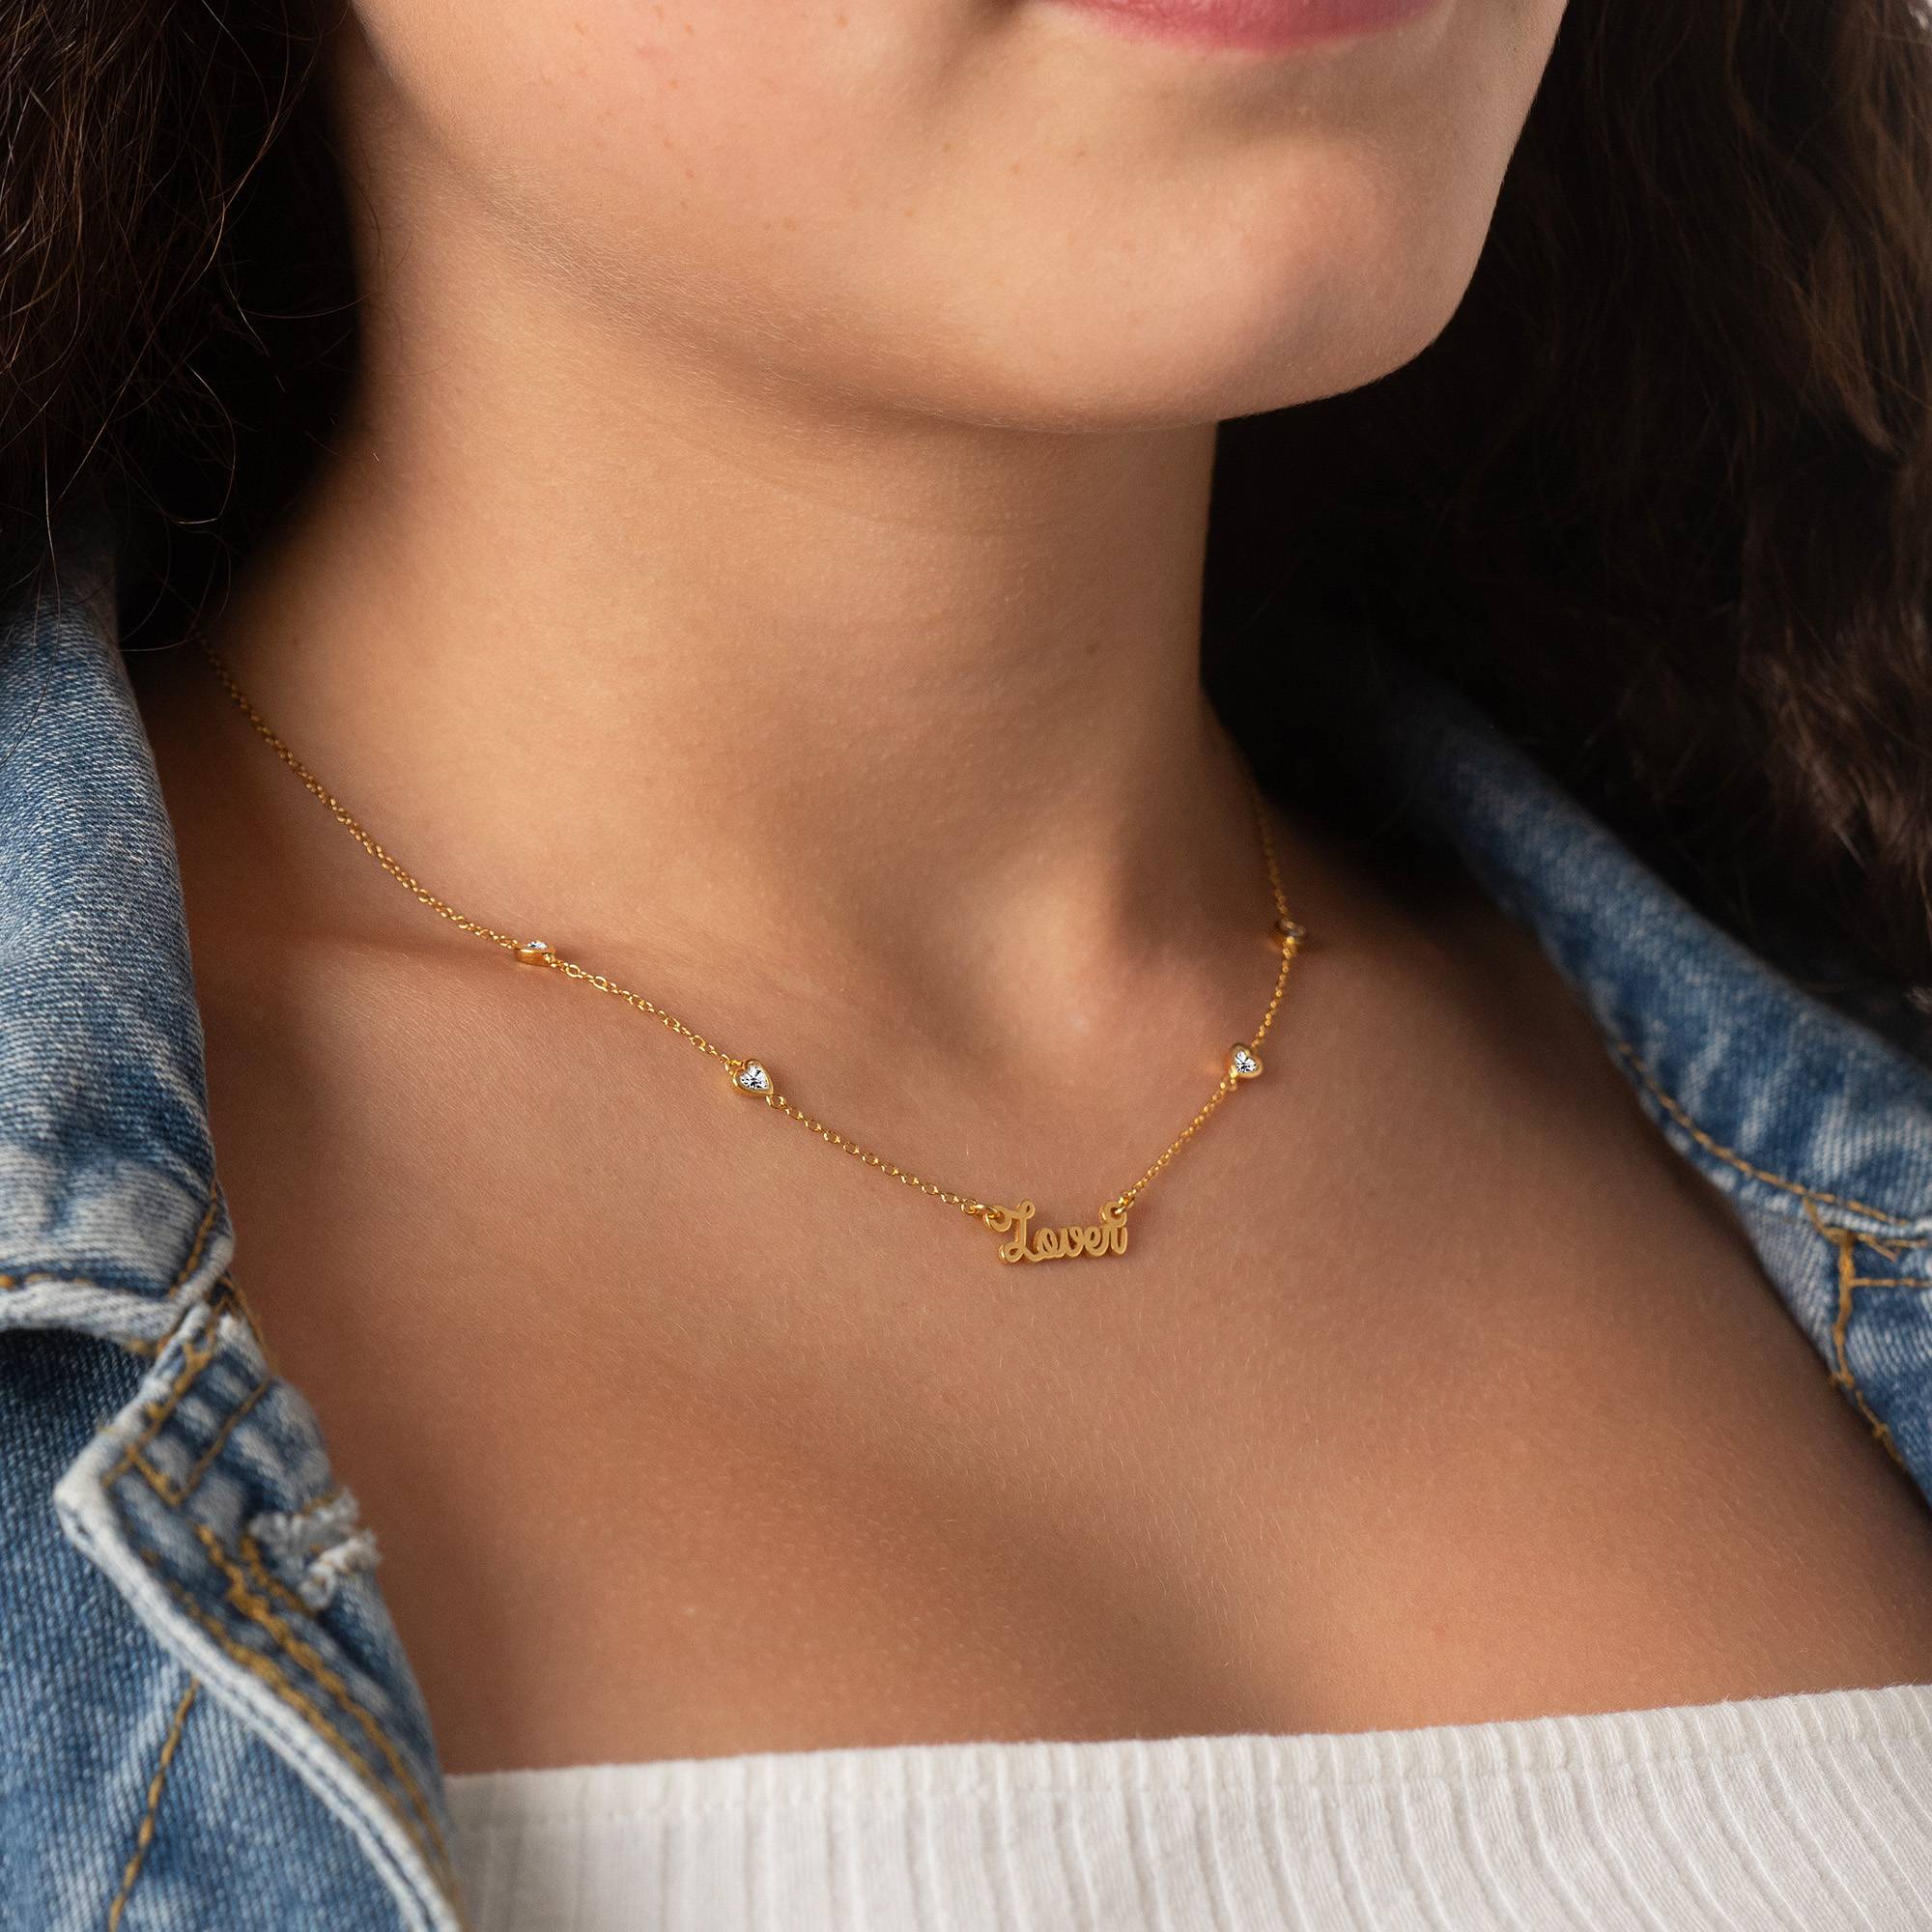 Charli Heart Chain Name Necklace in 18K Gold Vermeil-5 product photo